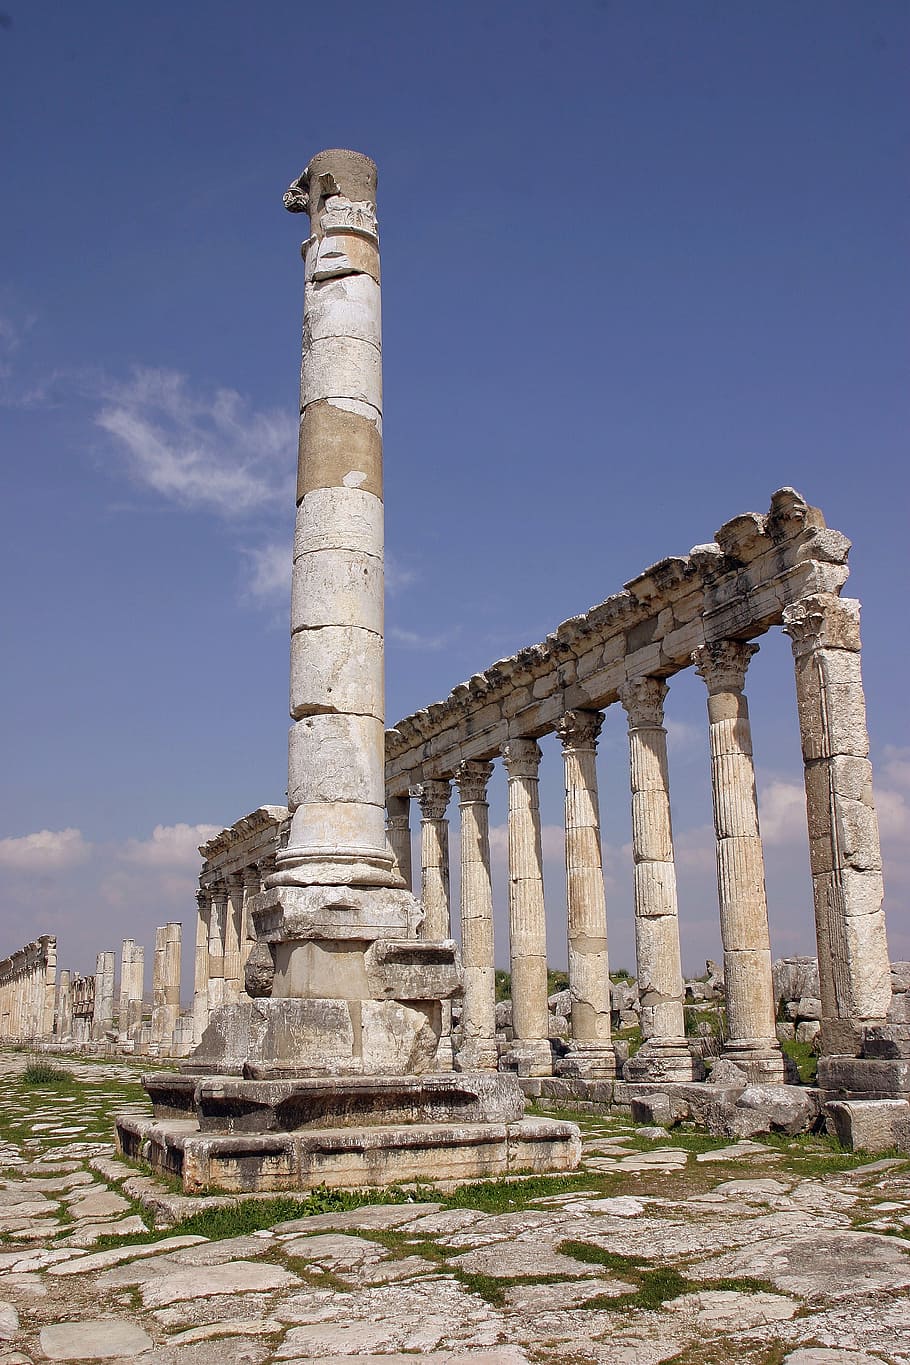 aphamia, byzantisch, syria, ancient cities, history, the past, ancient, architecture, architectural column, sky